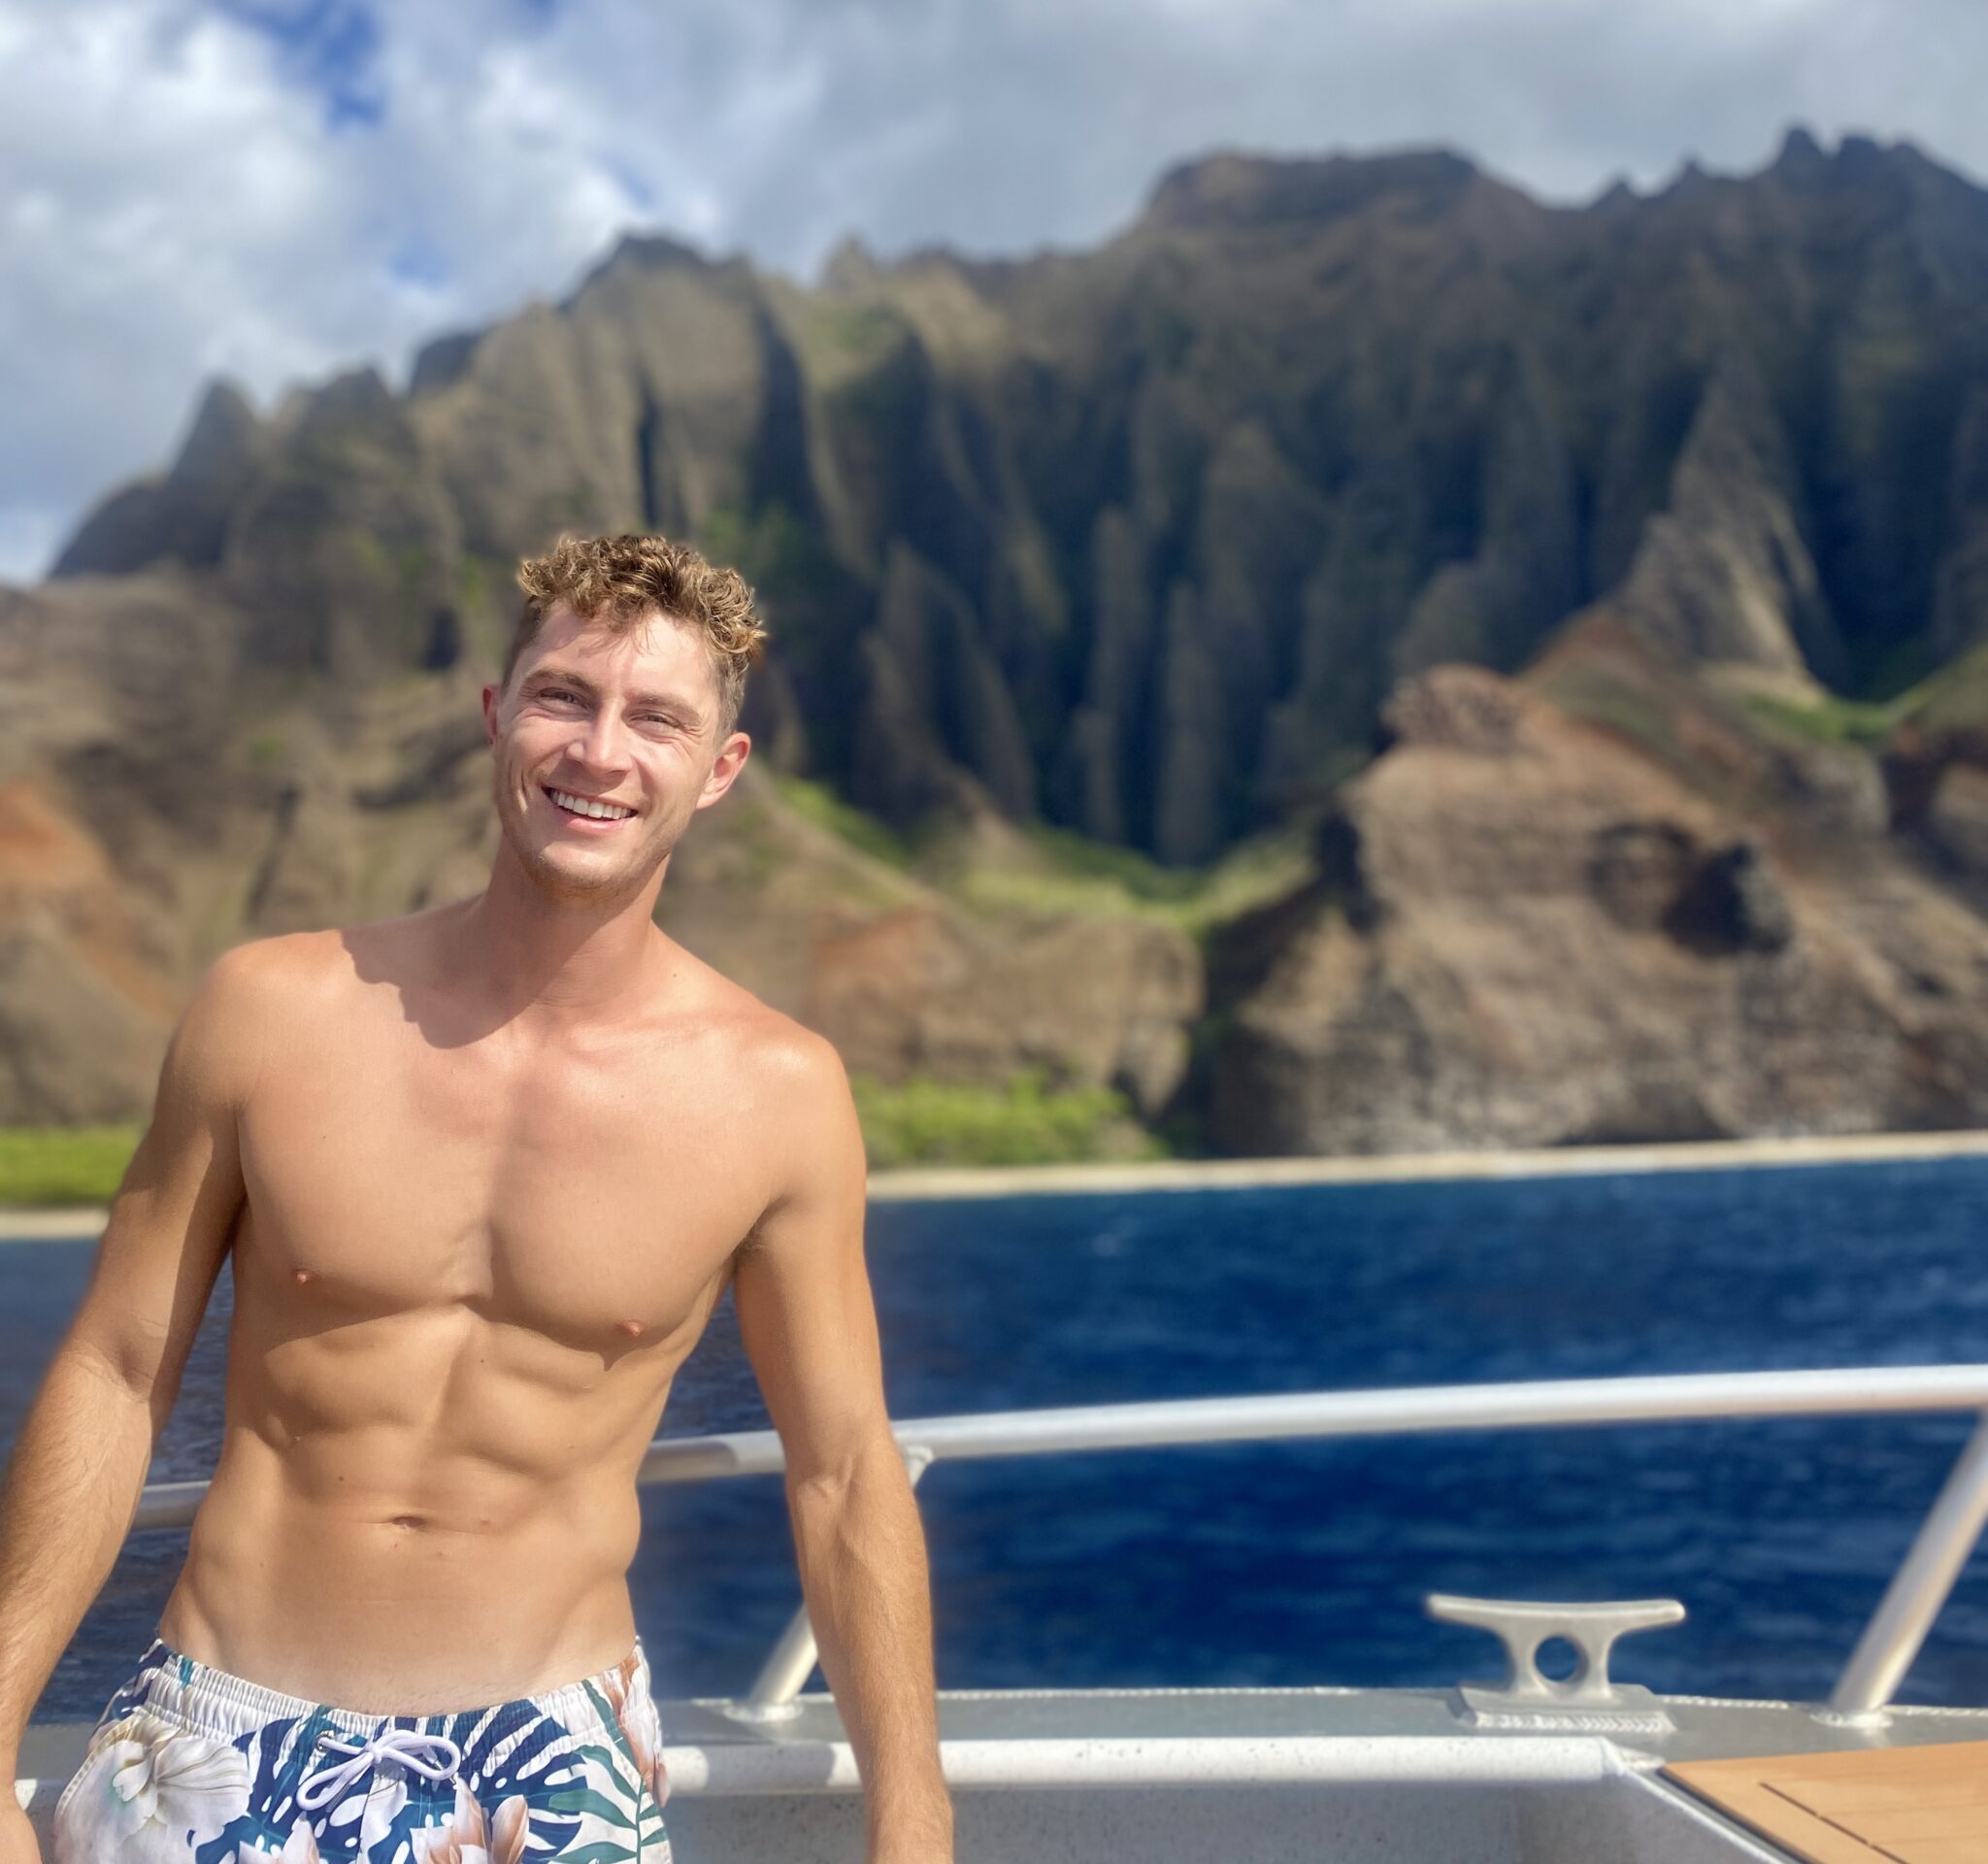 connor gowland in hawaii